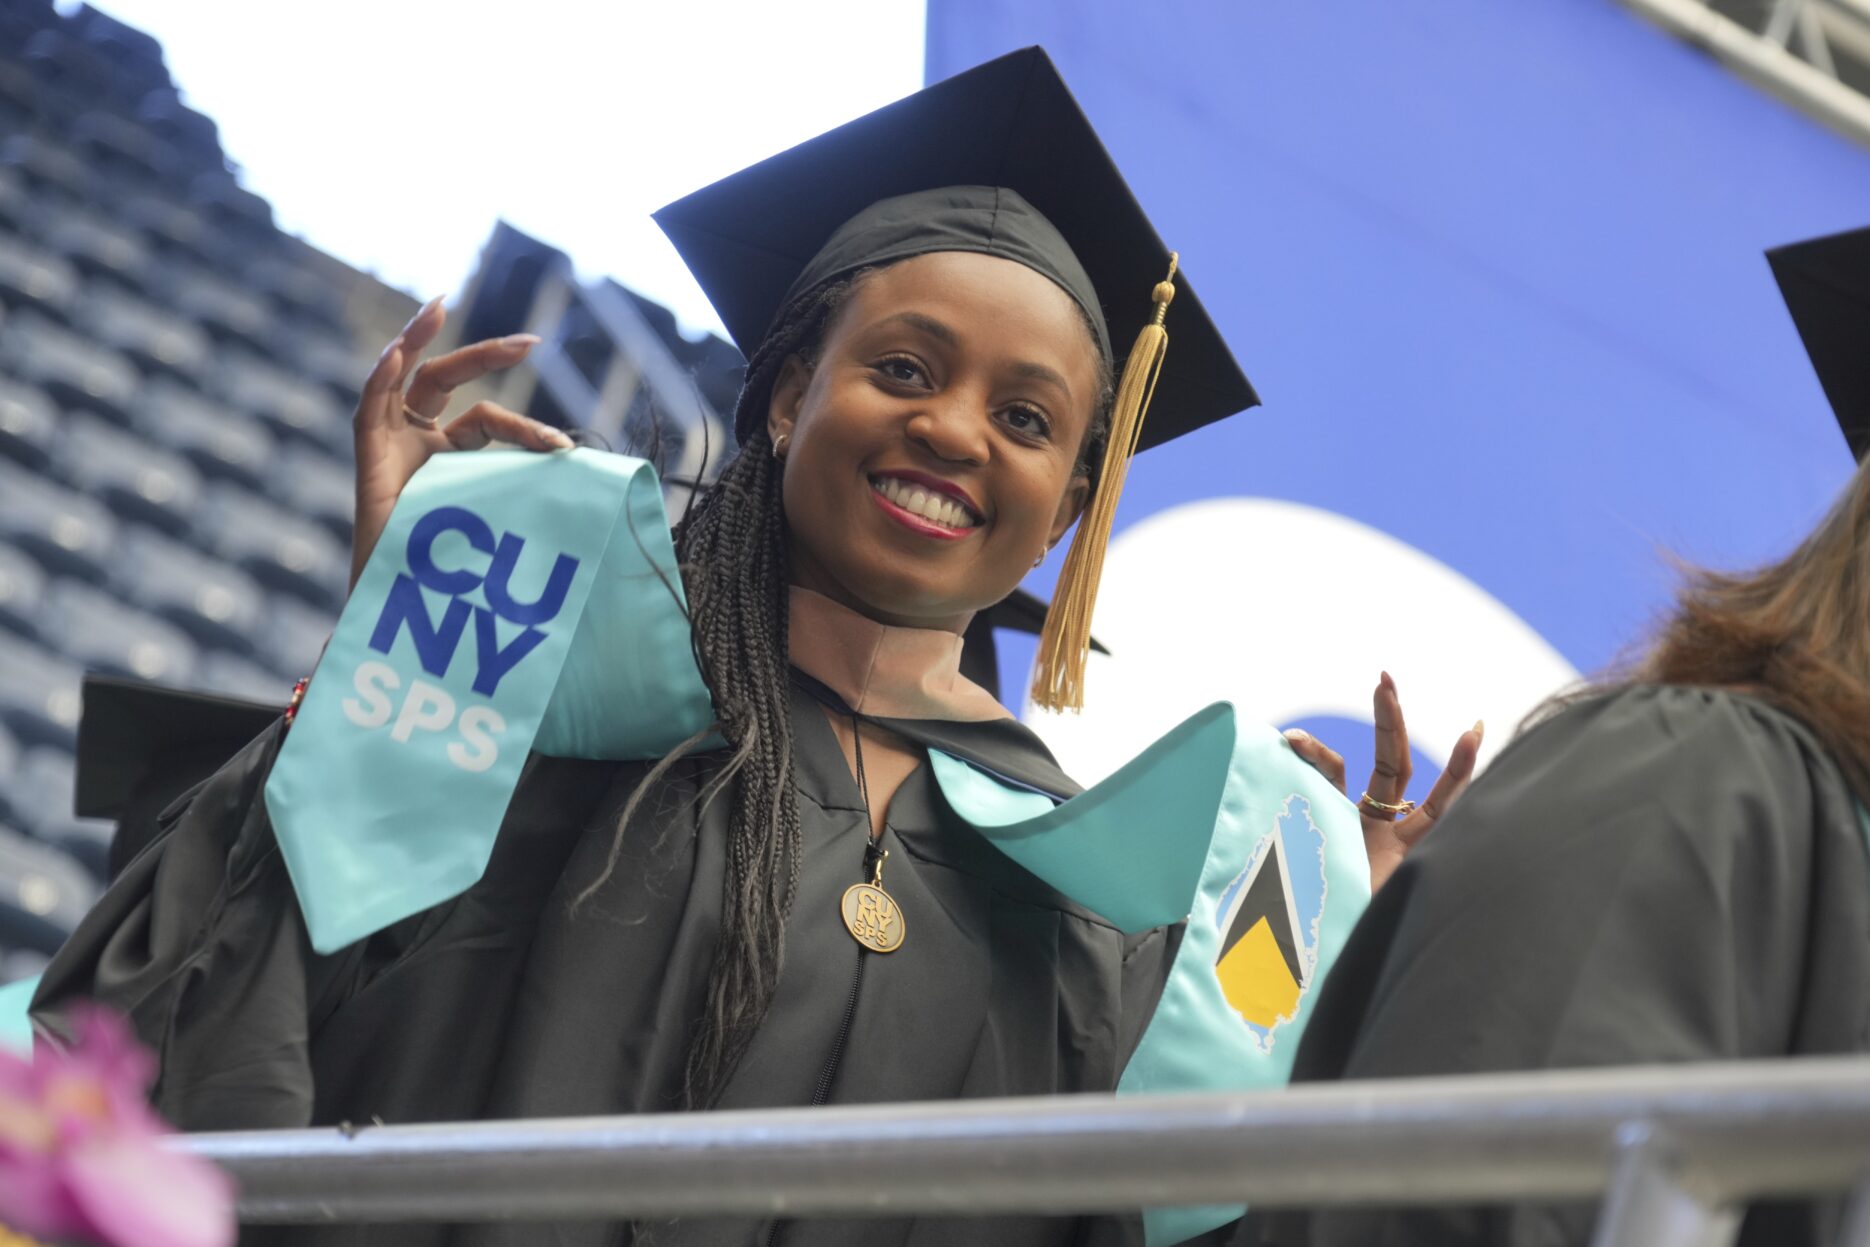 A CUNY SPS grad holding up her sash during the 2023 commencement in Louis Armstrong Stadium in Queens.